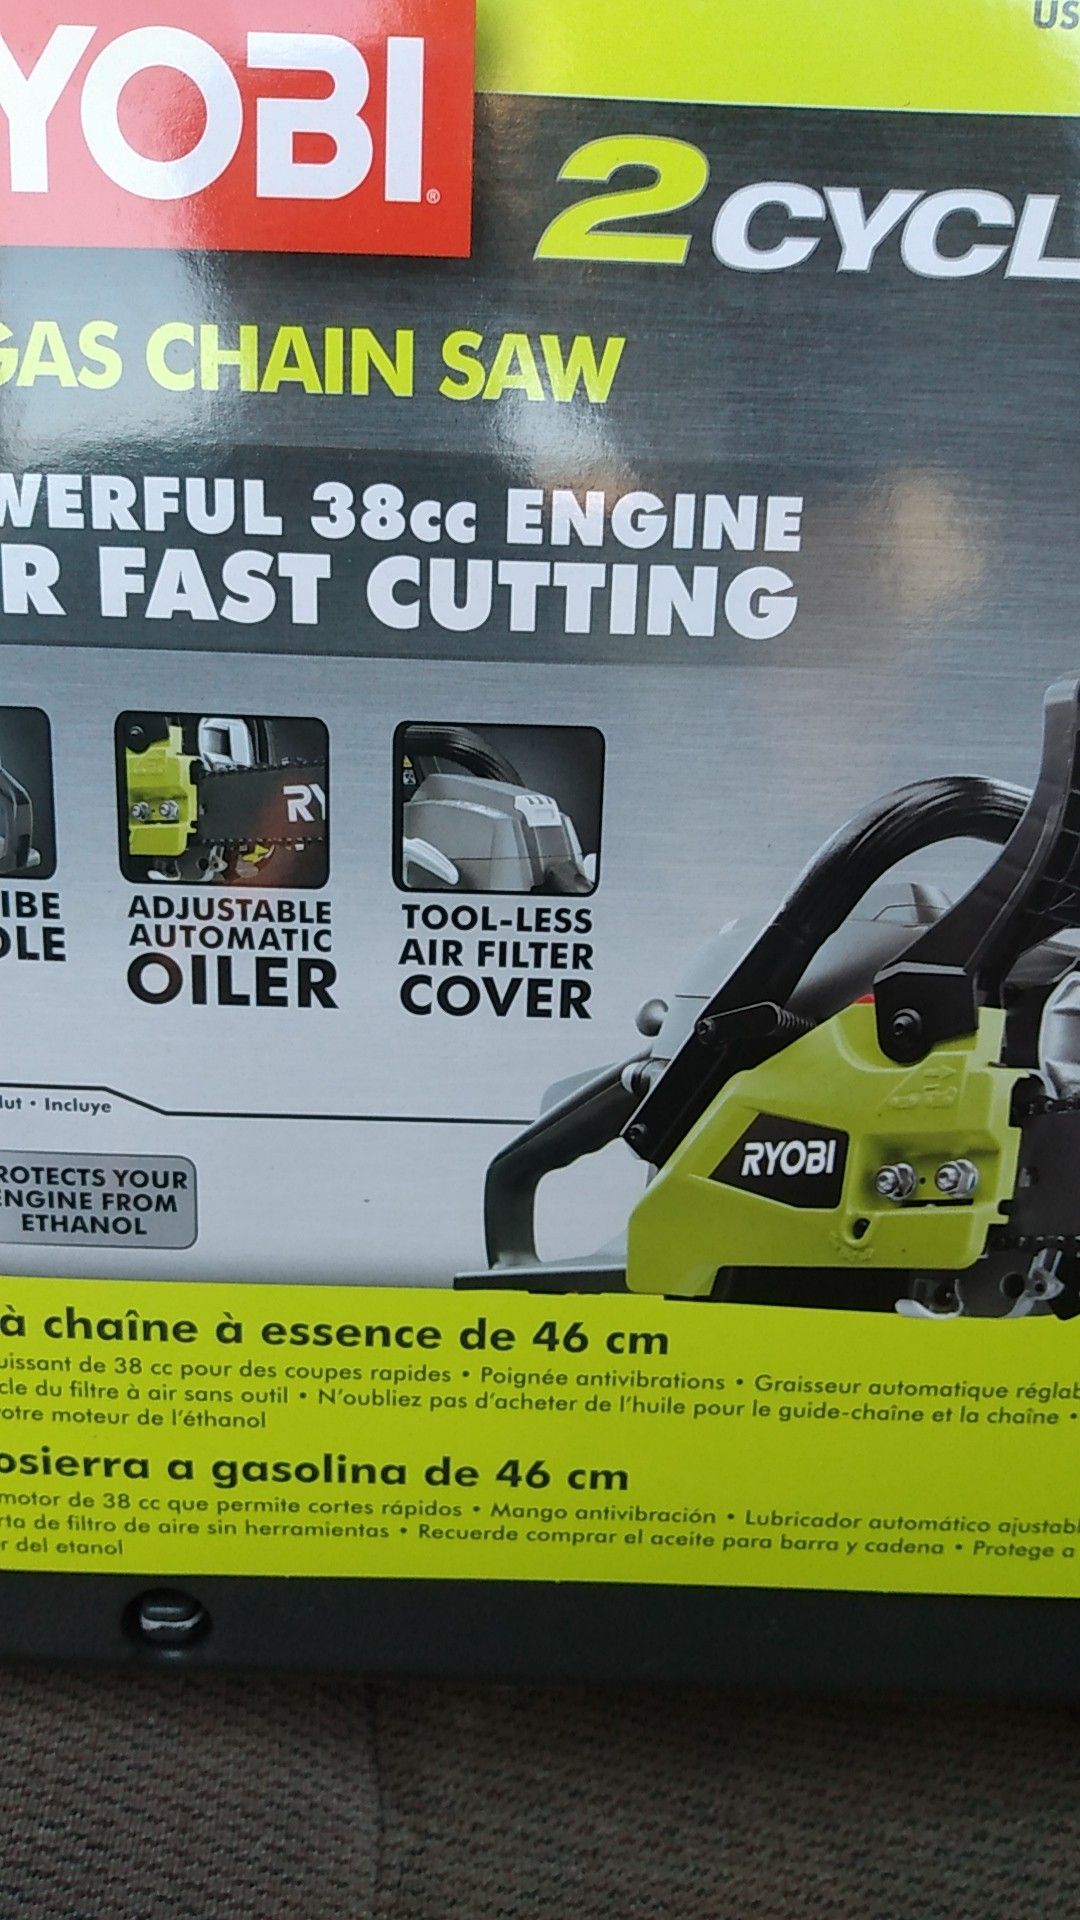 Ryobi two-cycle 18-in gas chainsaw